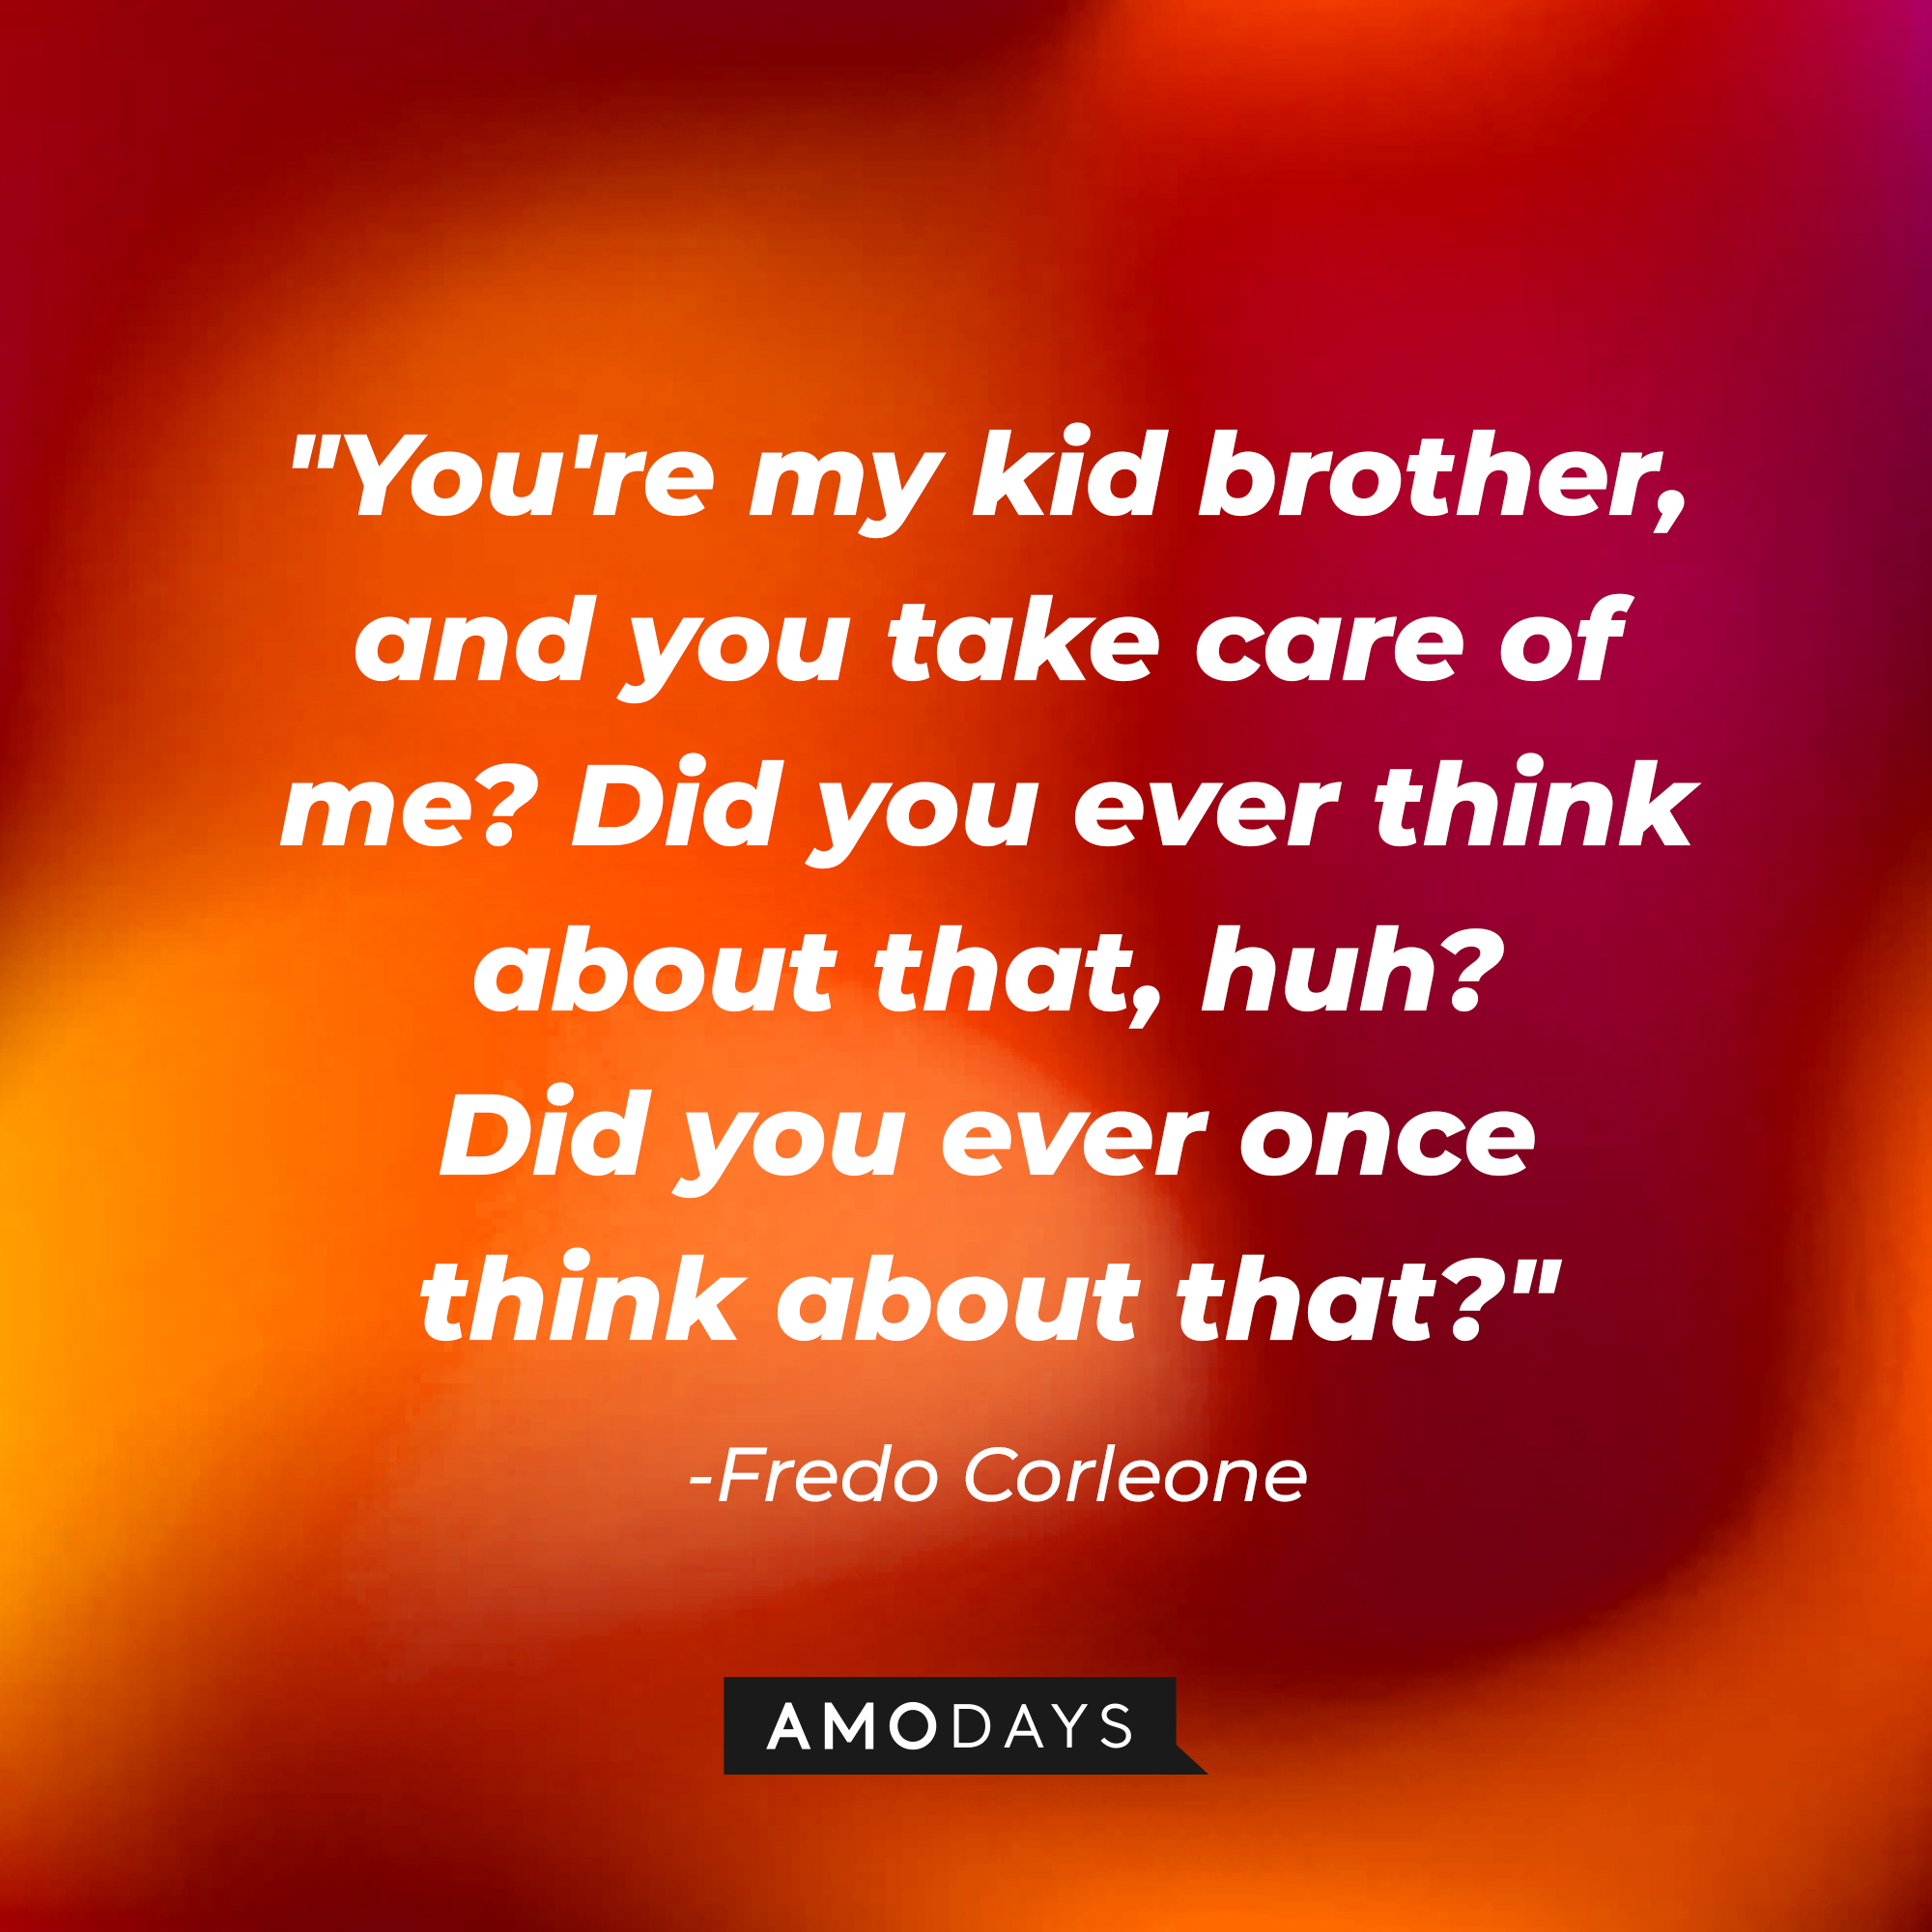 Fredo Corleone’s quote: "You're my kid brother, and you take care of me? Did you ever think about that, huh? Did you ever once think about that?" | Source: AmoDays